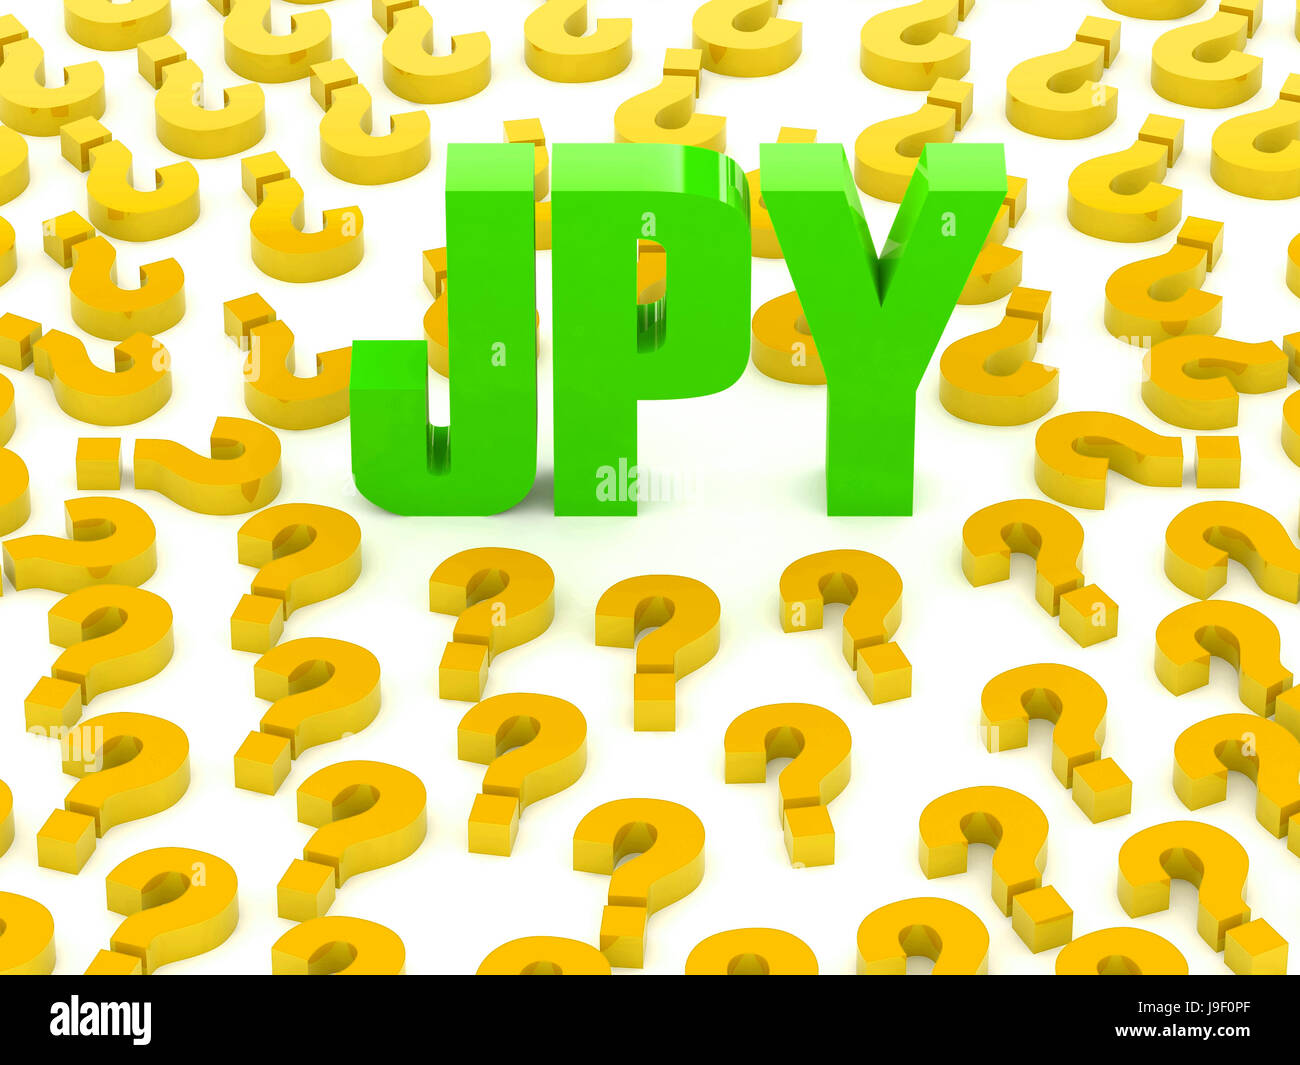 JPY sign surrounded by question marks. Concept 3D illustration. Stock Photo